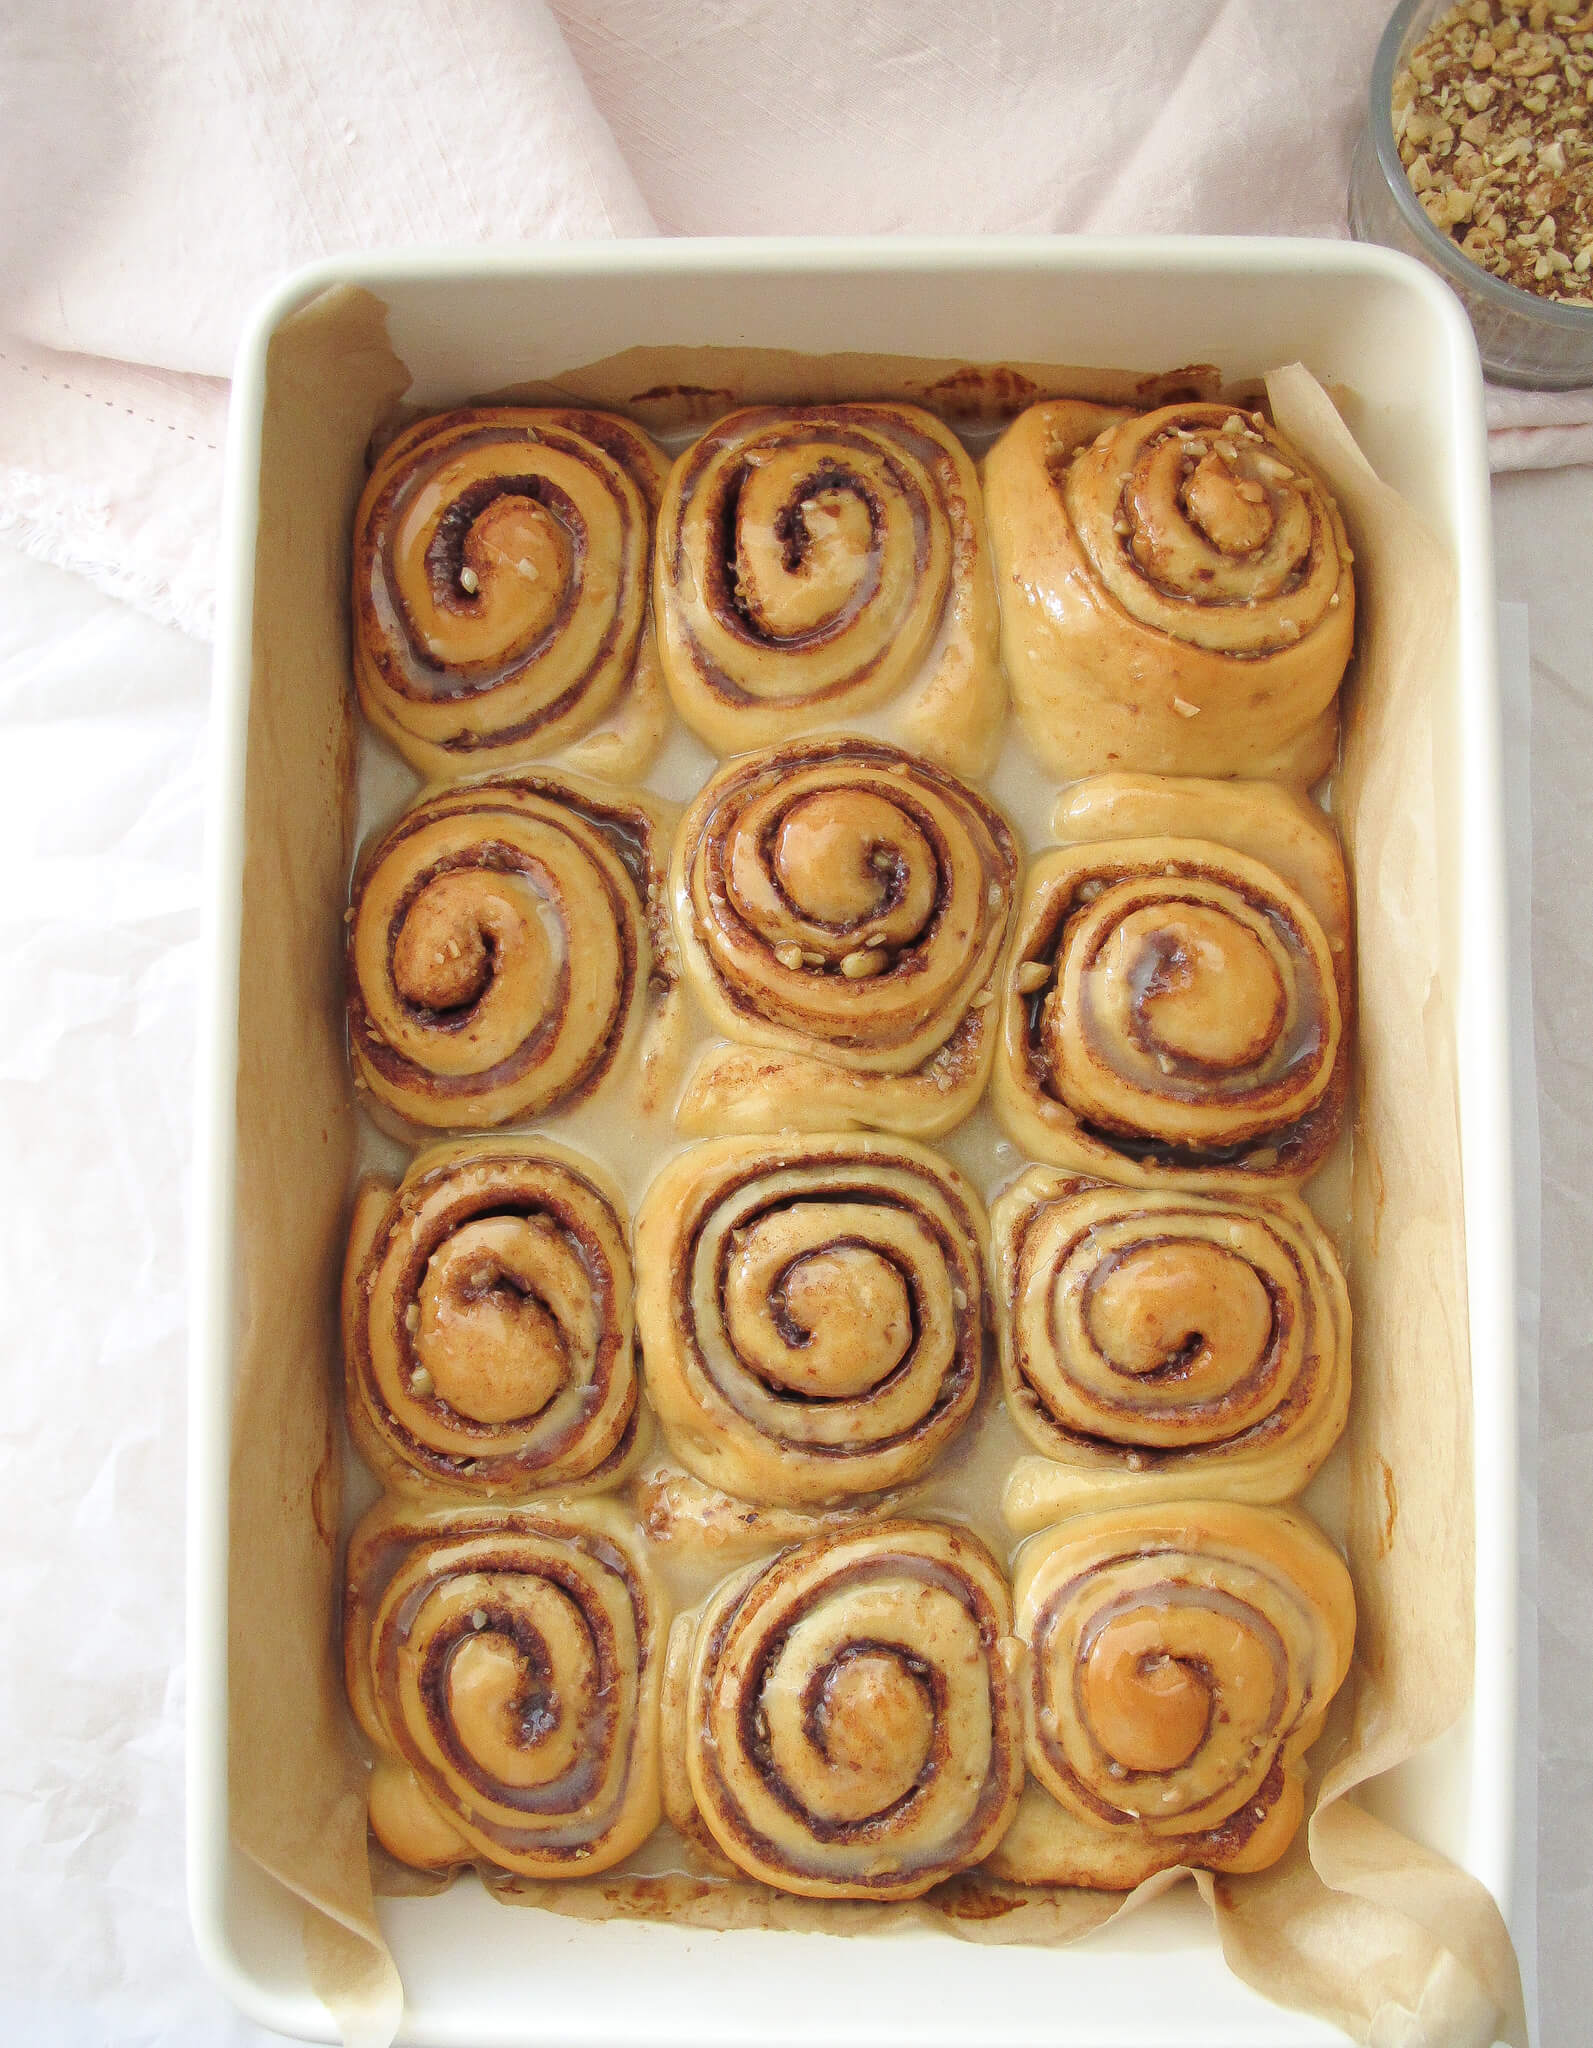 baklava cinnamon rolls baked in a baking dish with icing